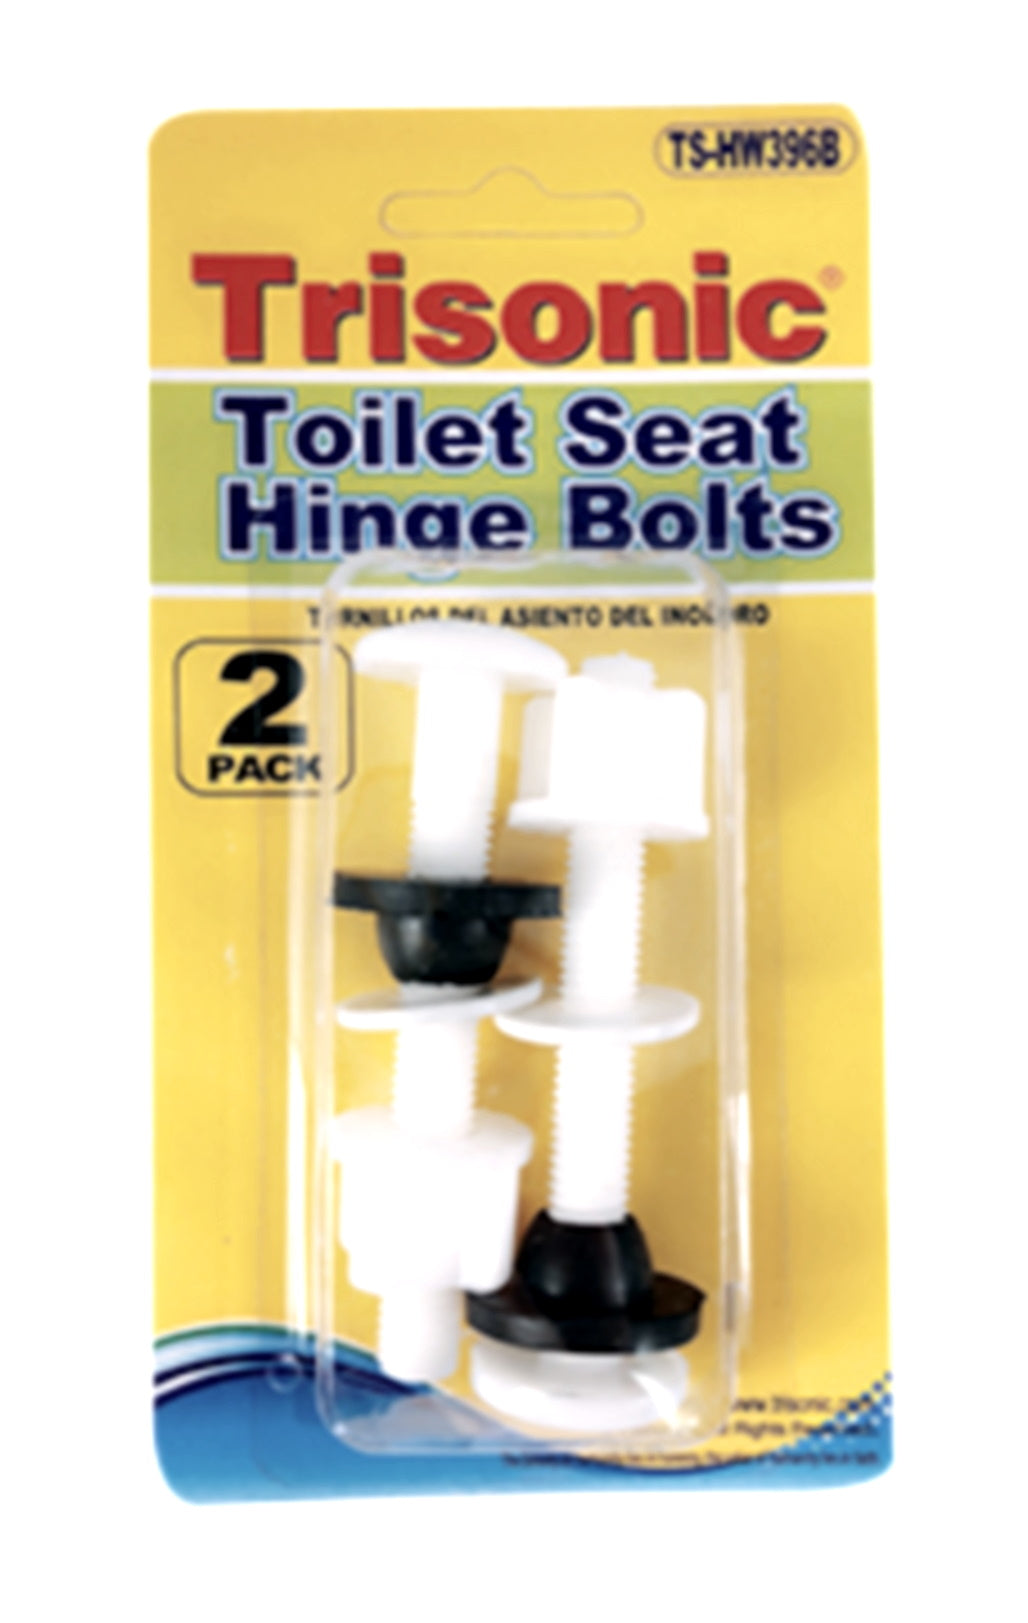 Trisonic Toilet Seat Hinge Bolts - Attaches Toilet Seat Hinge to Bowl